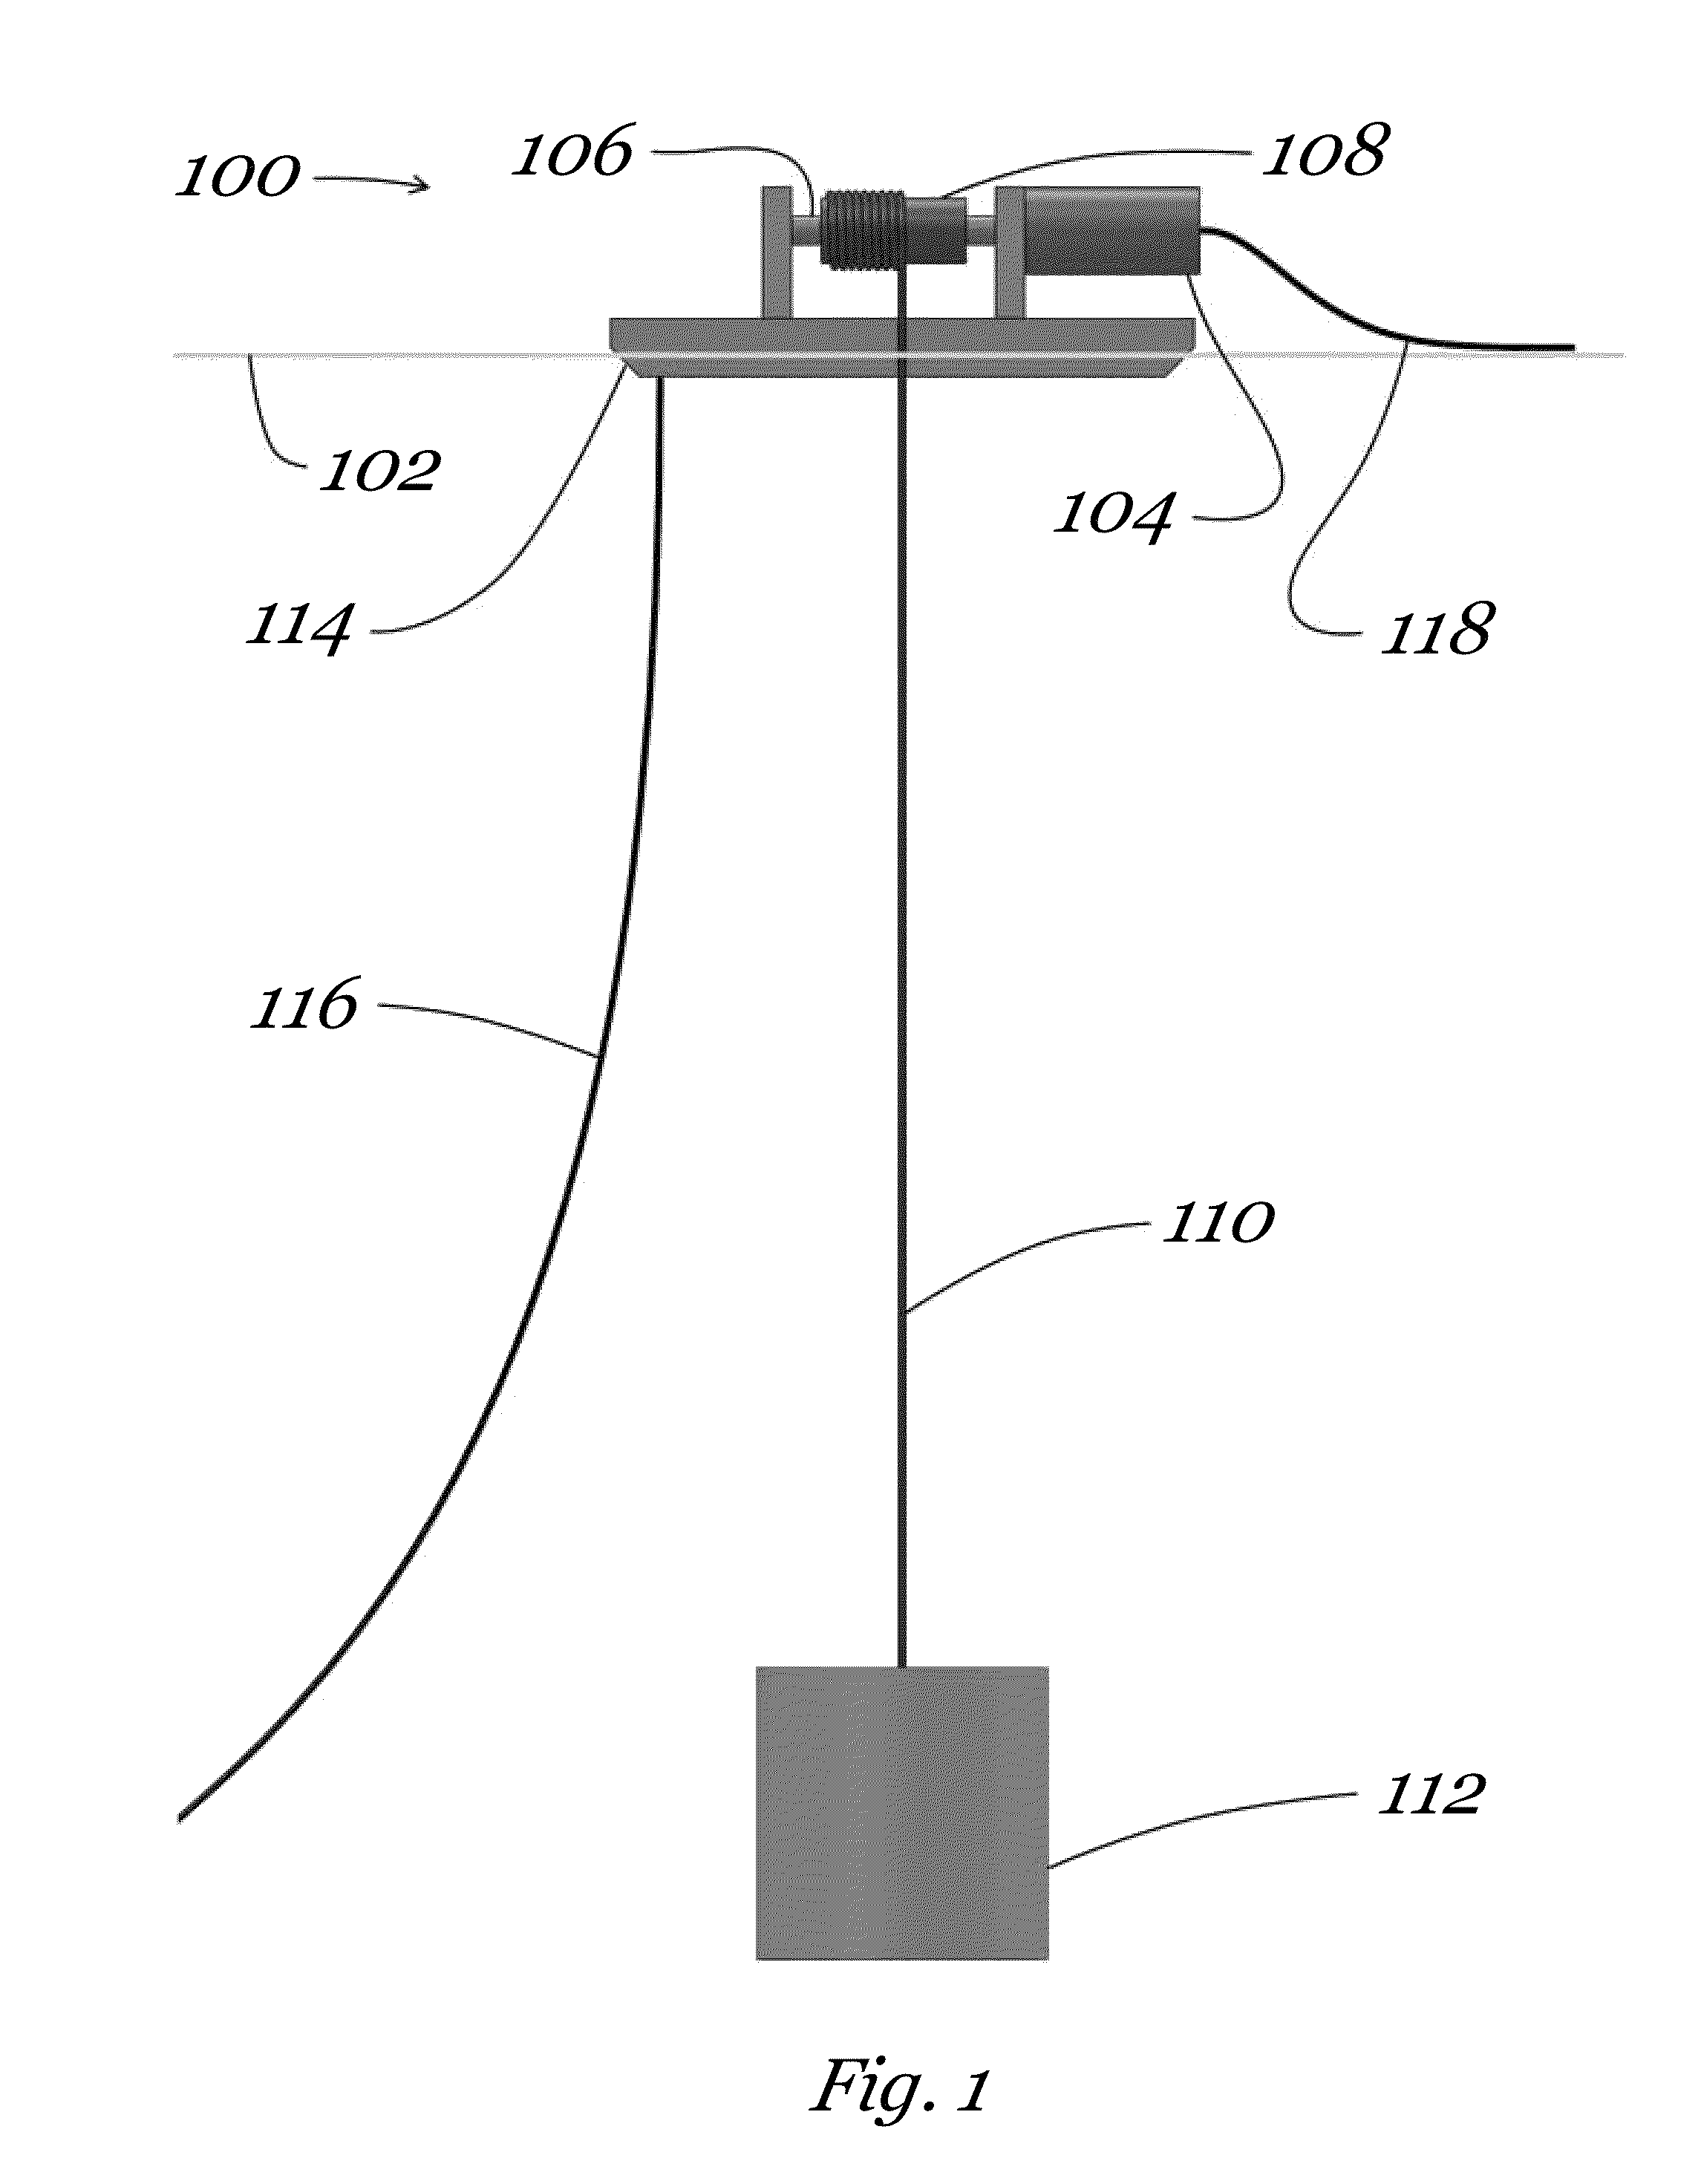 Energy storage devices and methods of using same